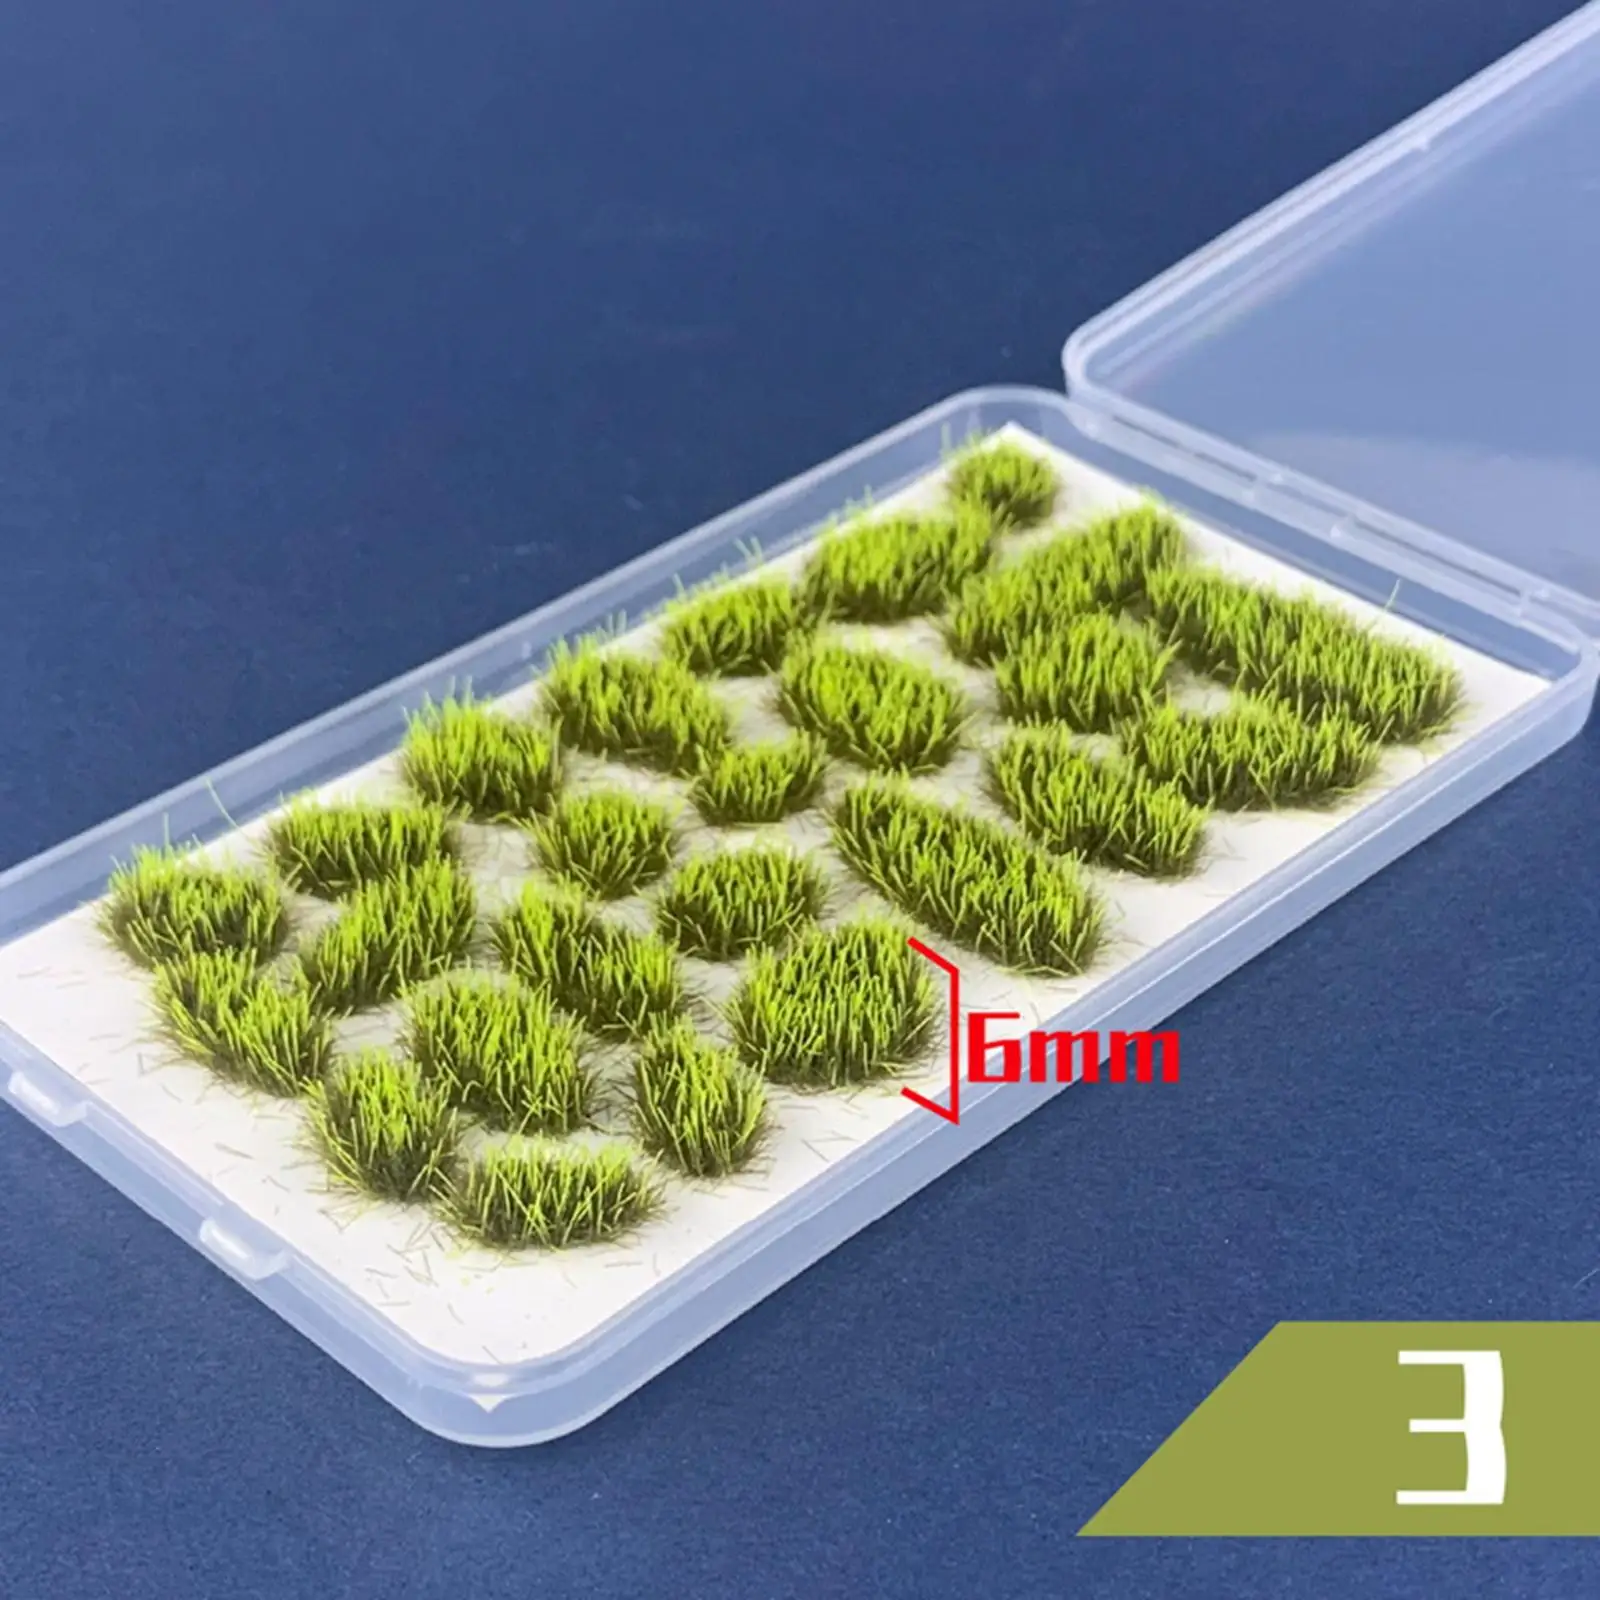 25 Pieces Cluster Grass Sand Table Miniature Scene Grass Tufts Set Cluster Model for Architecture Building DIY Landscape Layout